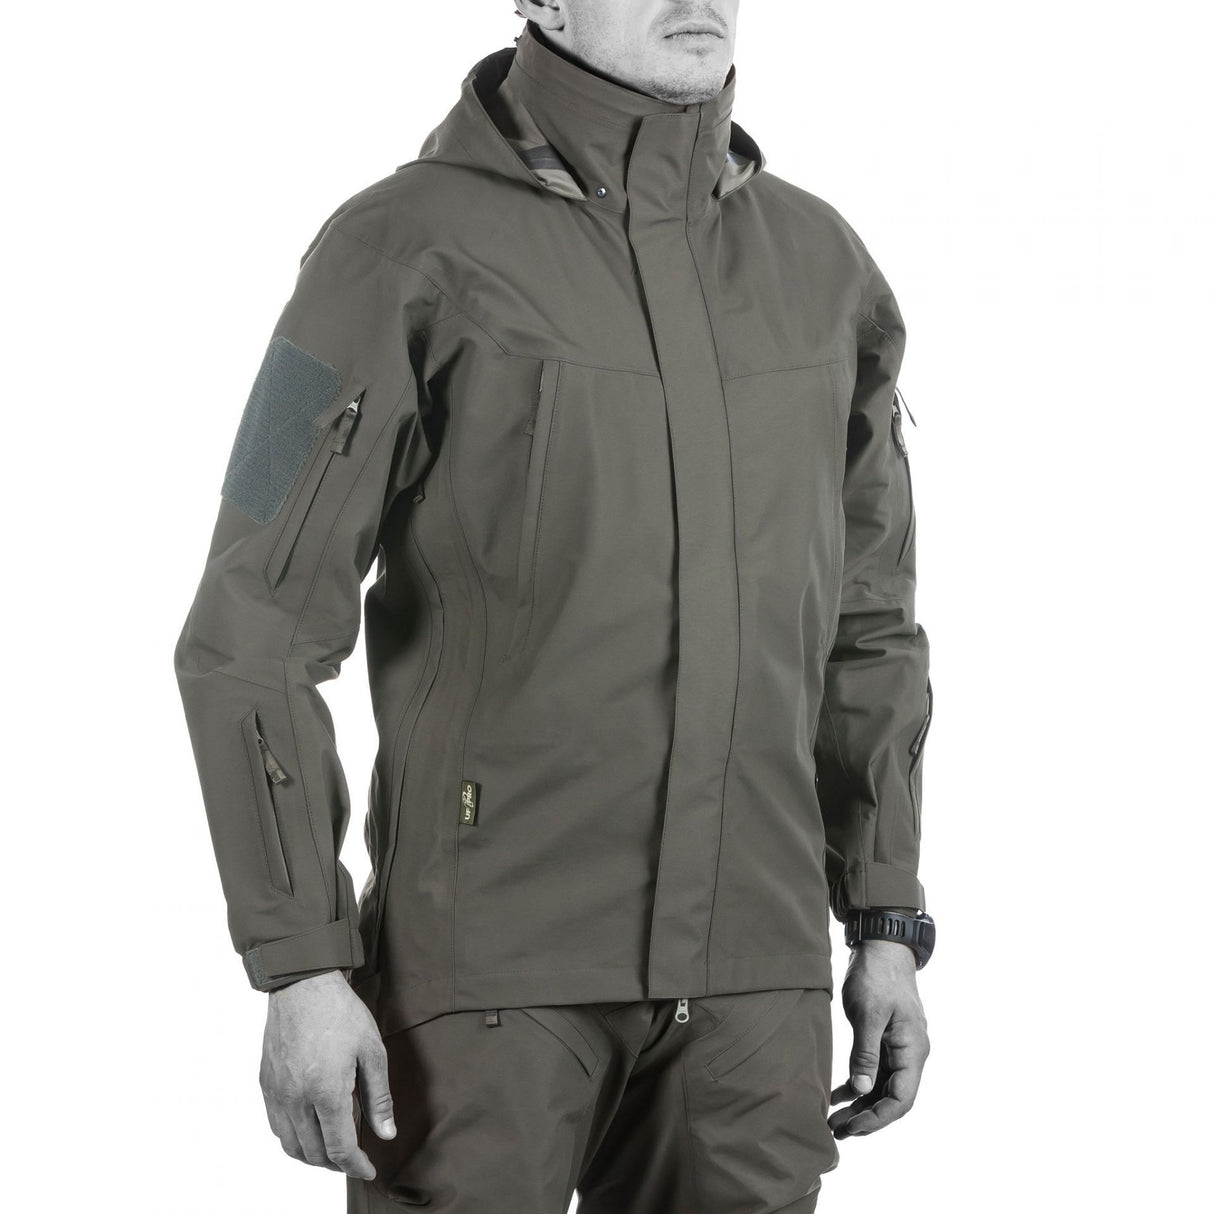 Protect yourself from severe weather with the Monsoon XT Gen.2 Tactical Rain Jacket.